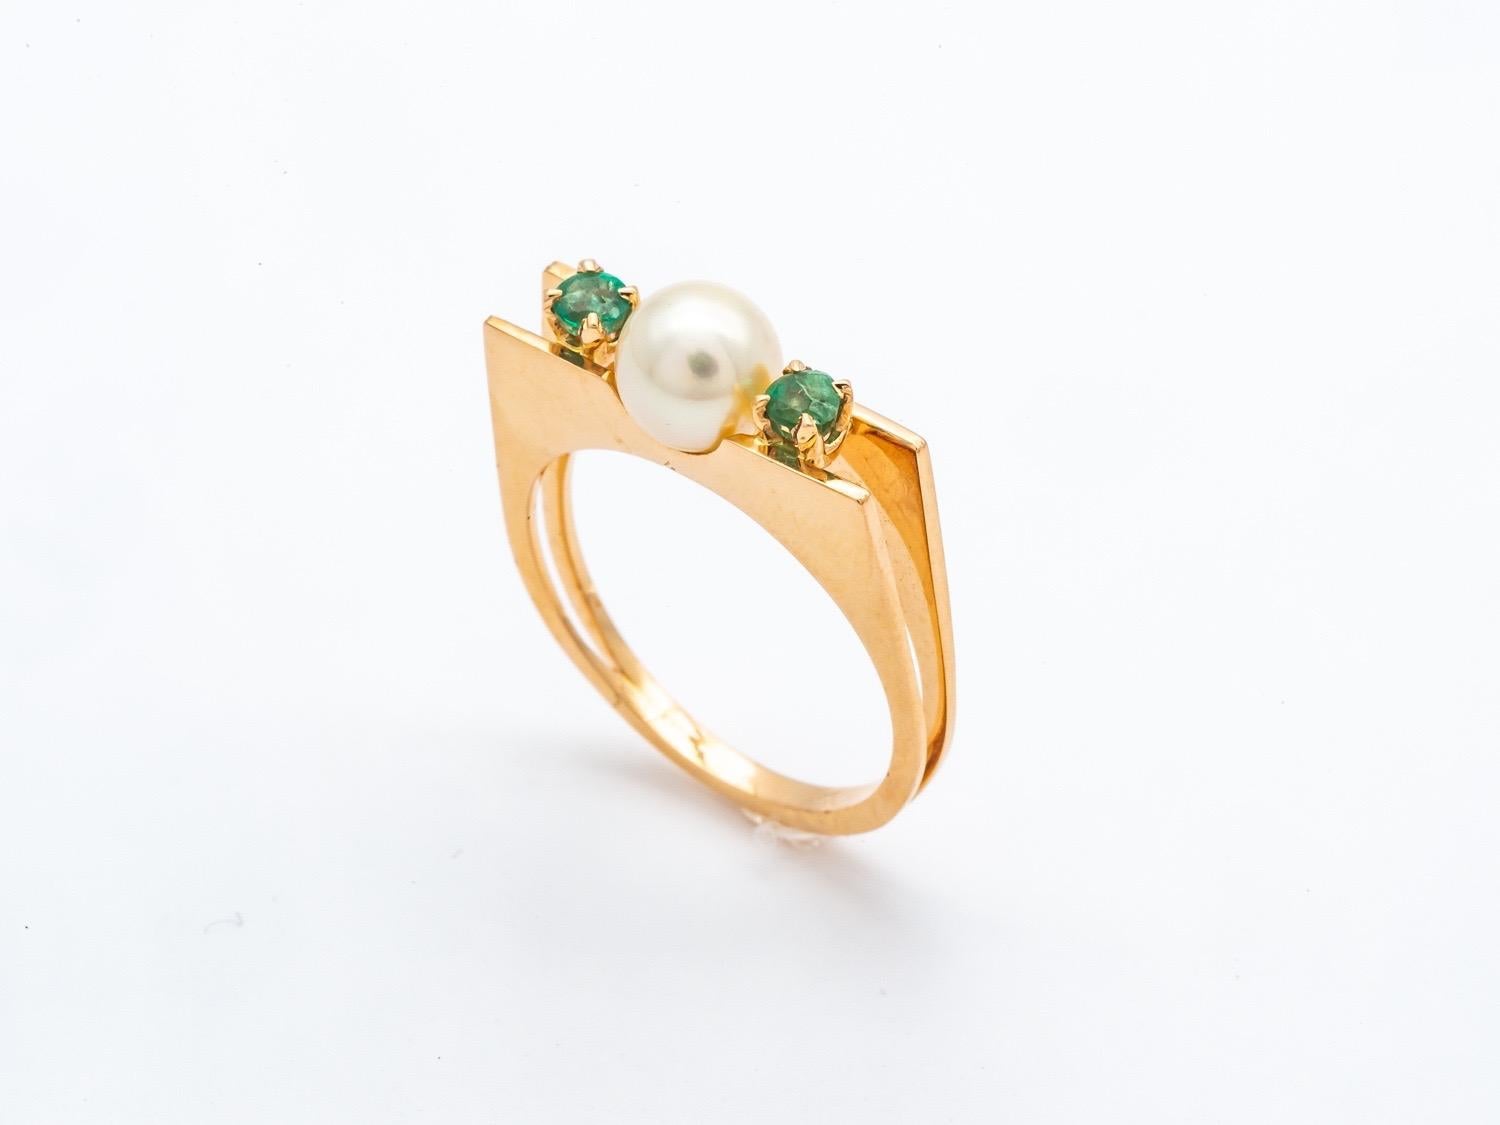 18K Yellow Gold Emeralds and Pearl , emeralds for 0.16 Carats per Akoya pearl 6.2 Millimeter or 0.244 Inch.
The frame is in 18K yellow gold is an original frame of modern manufacture
french size 51
US Size 5.75
british K 3/4
